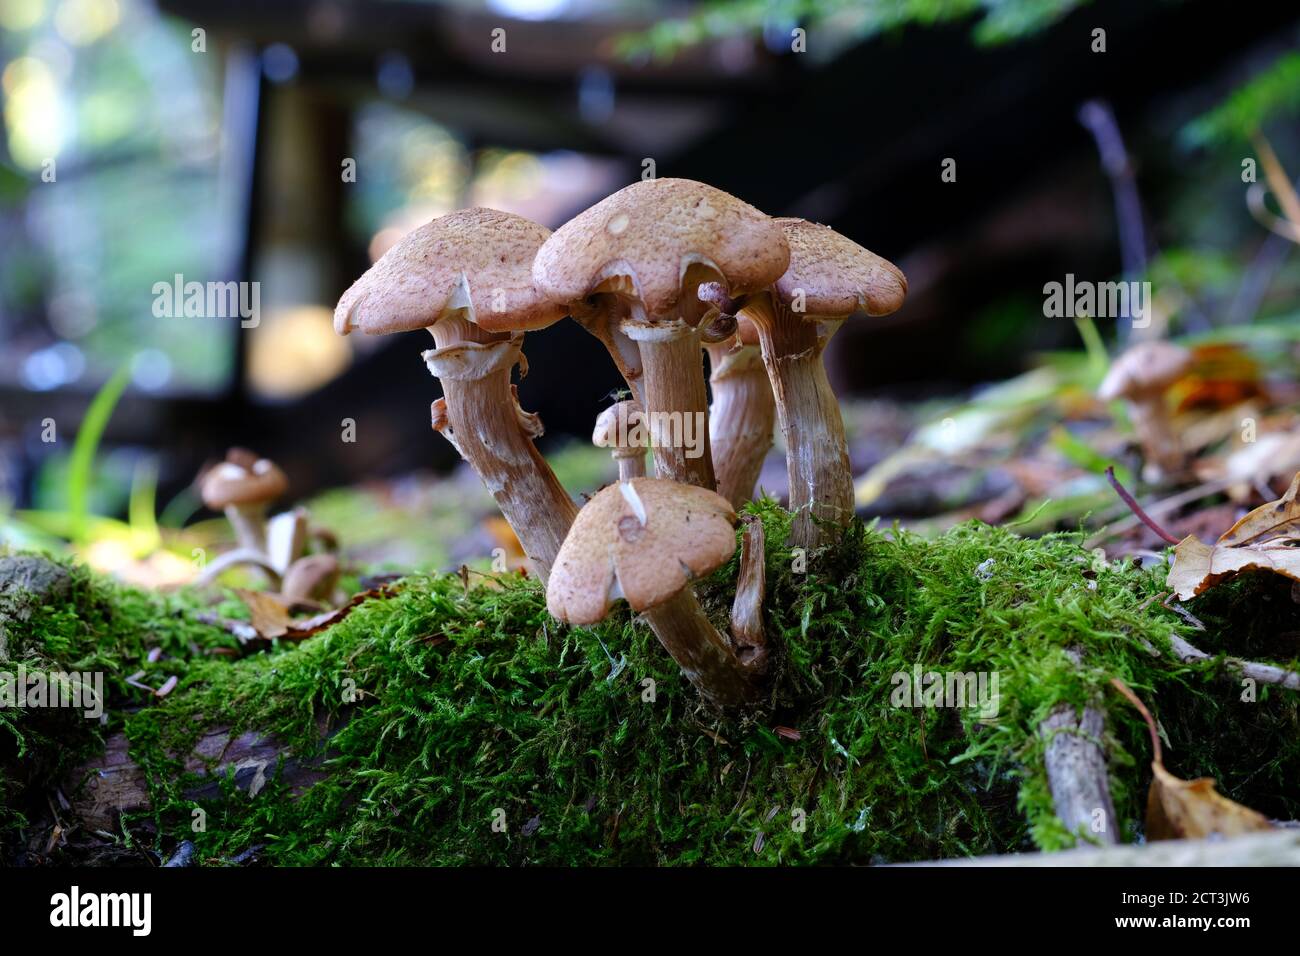 Small clump of brown cap mushroom (Armillaria lutea?) looking old and tattered on a mossy log. Val-des-Monts, Quebec, Canada. Stock Photo